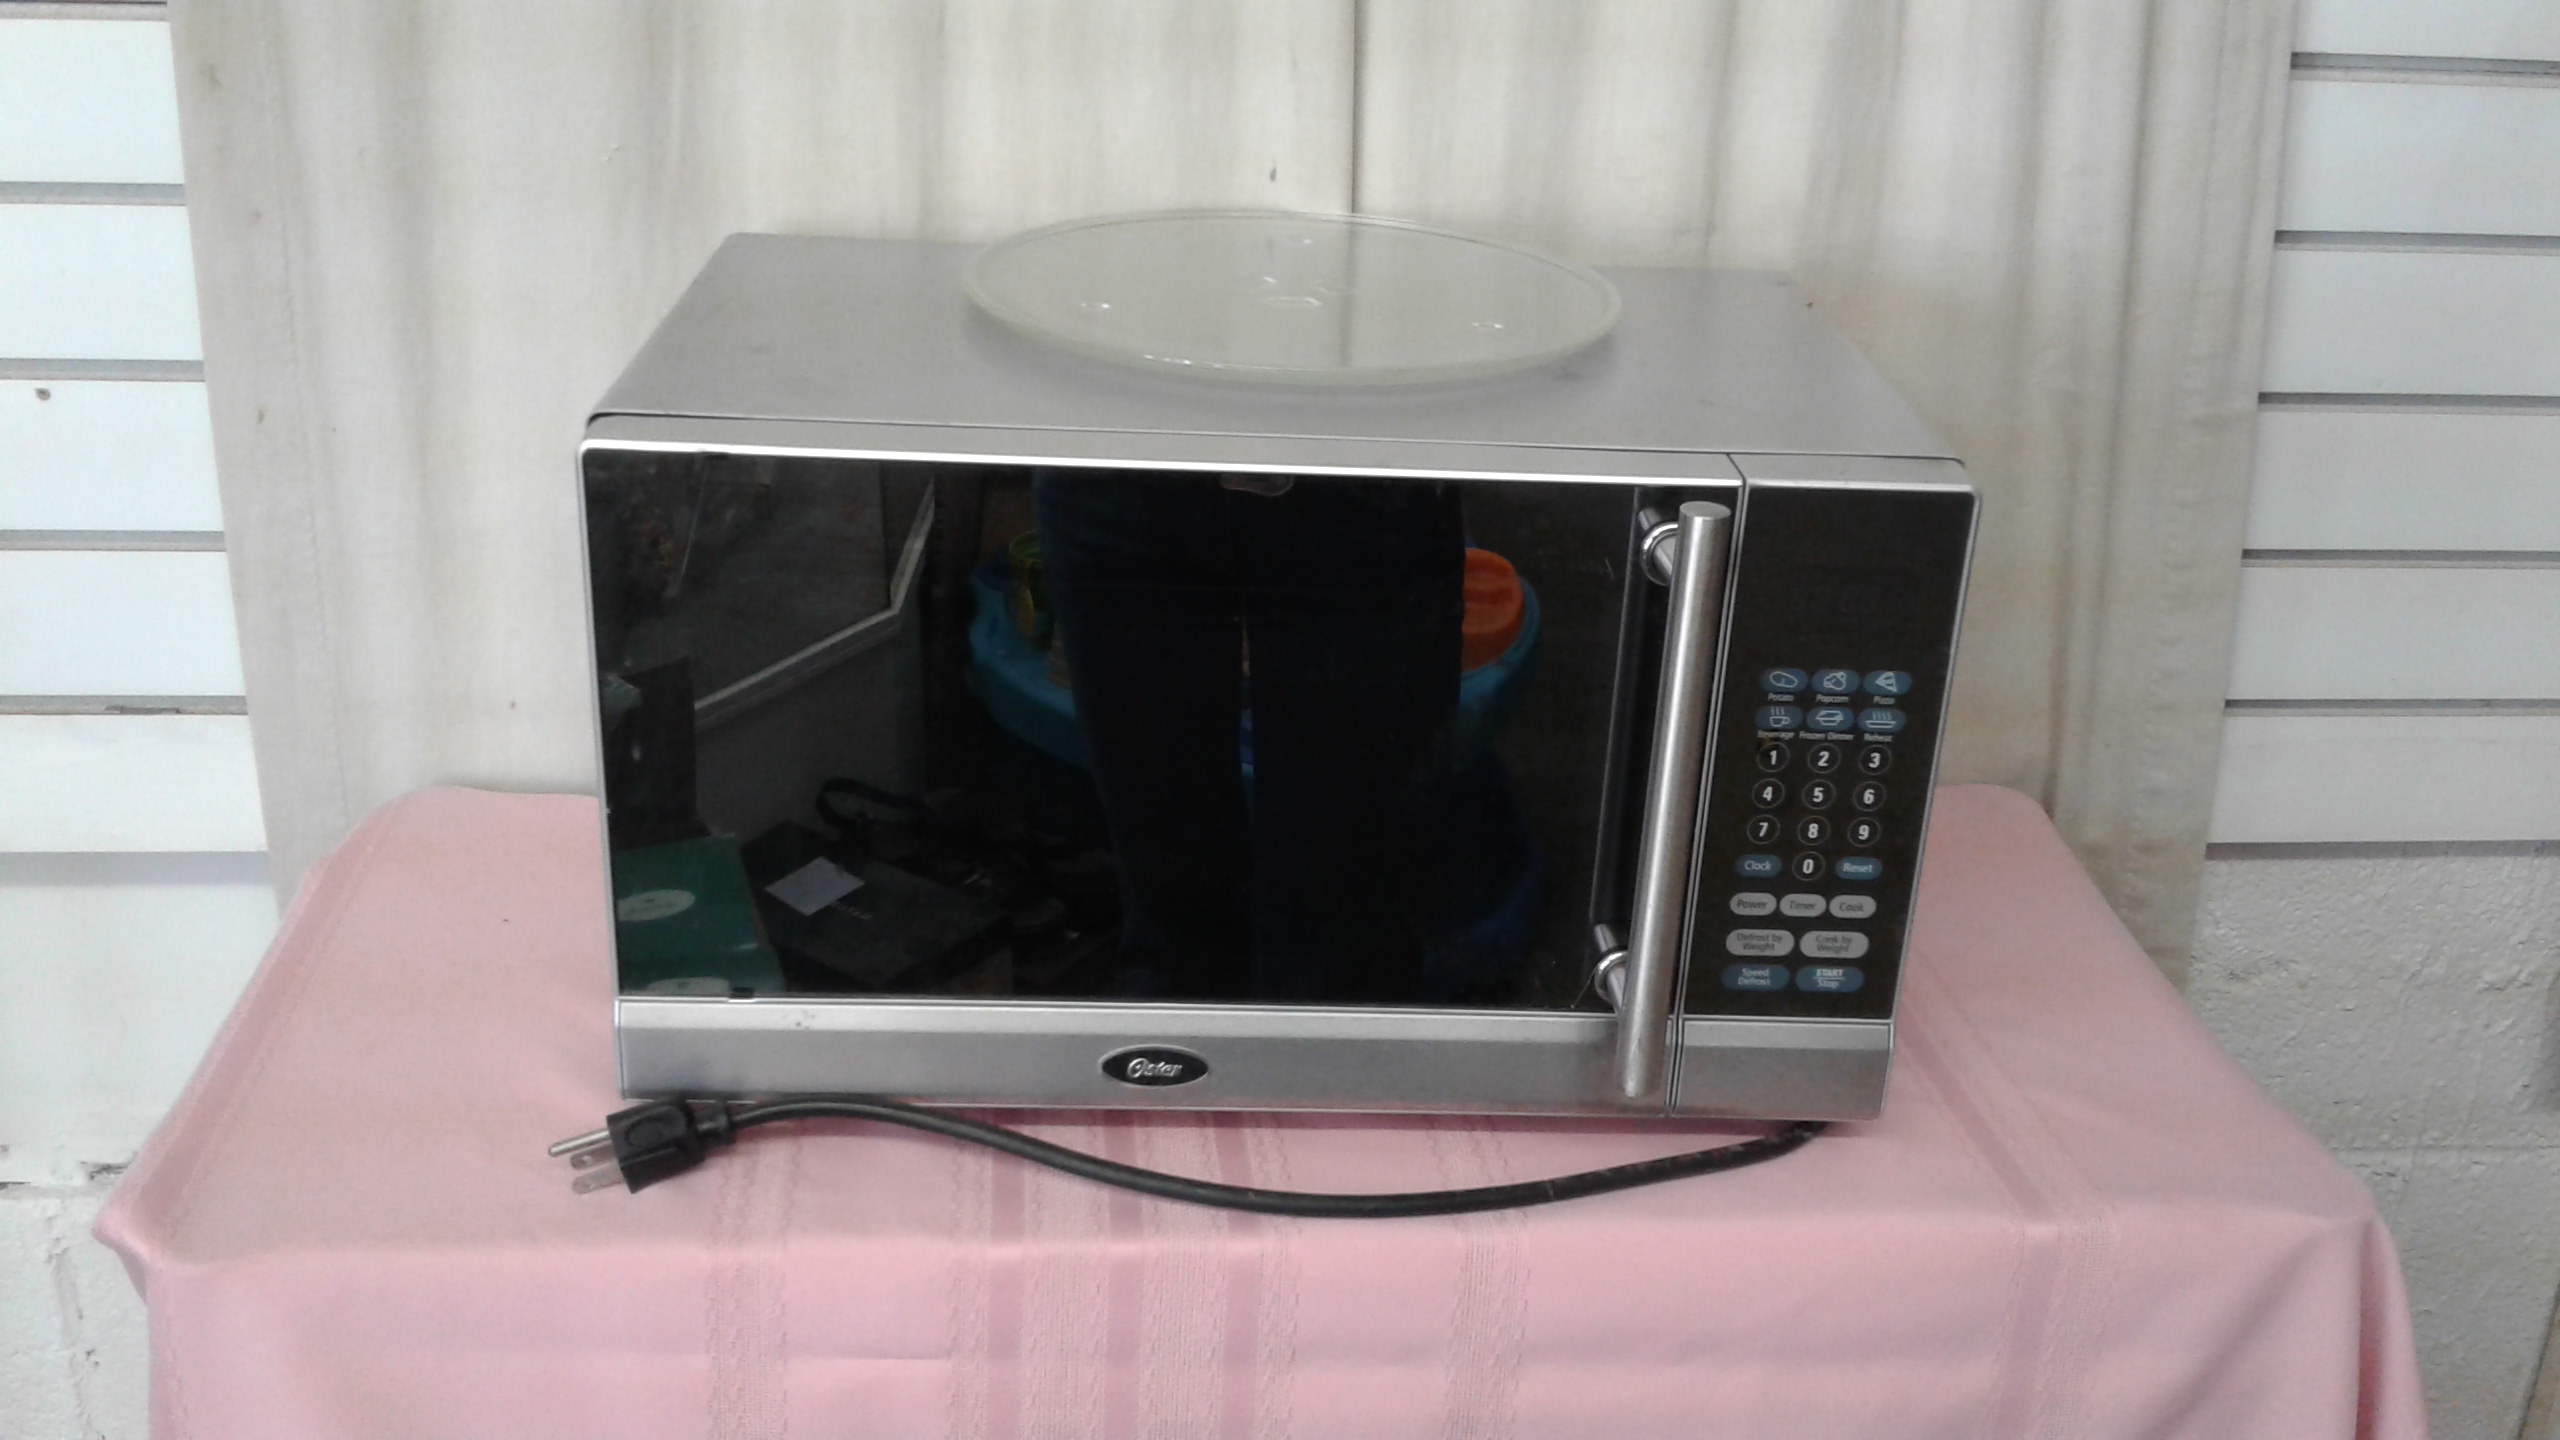 oster microwave